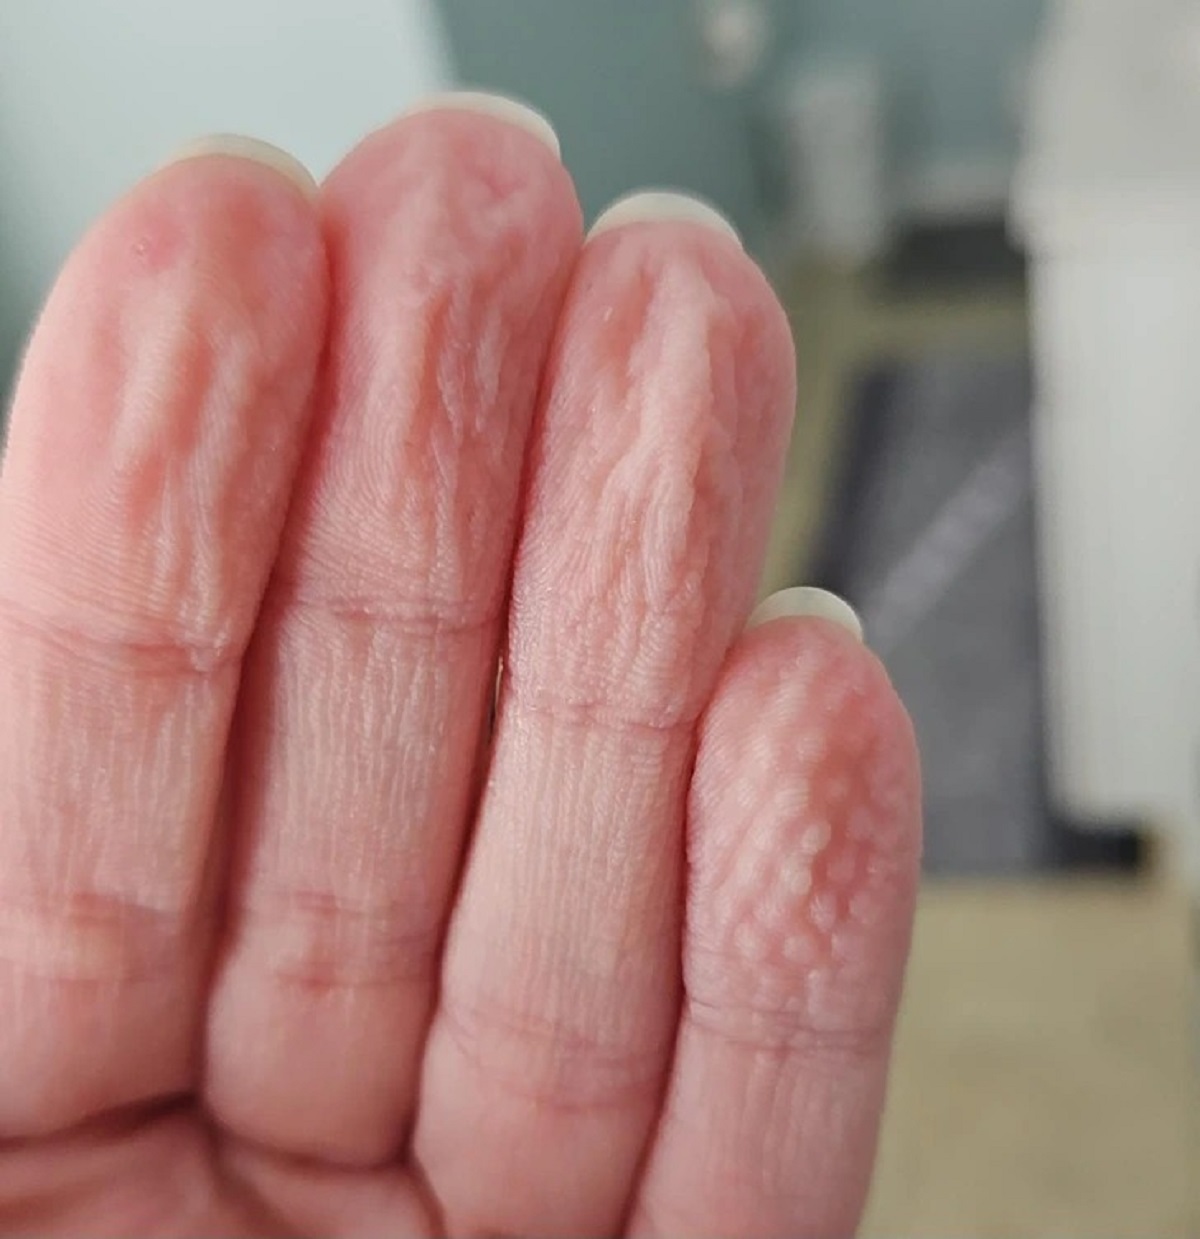 “My pinky finger after showering 1 day after I burned it.”